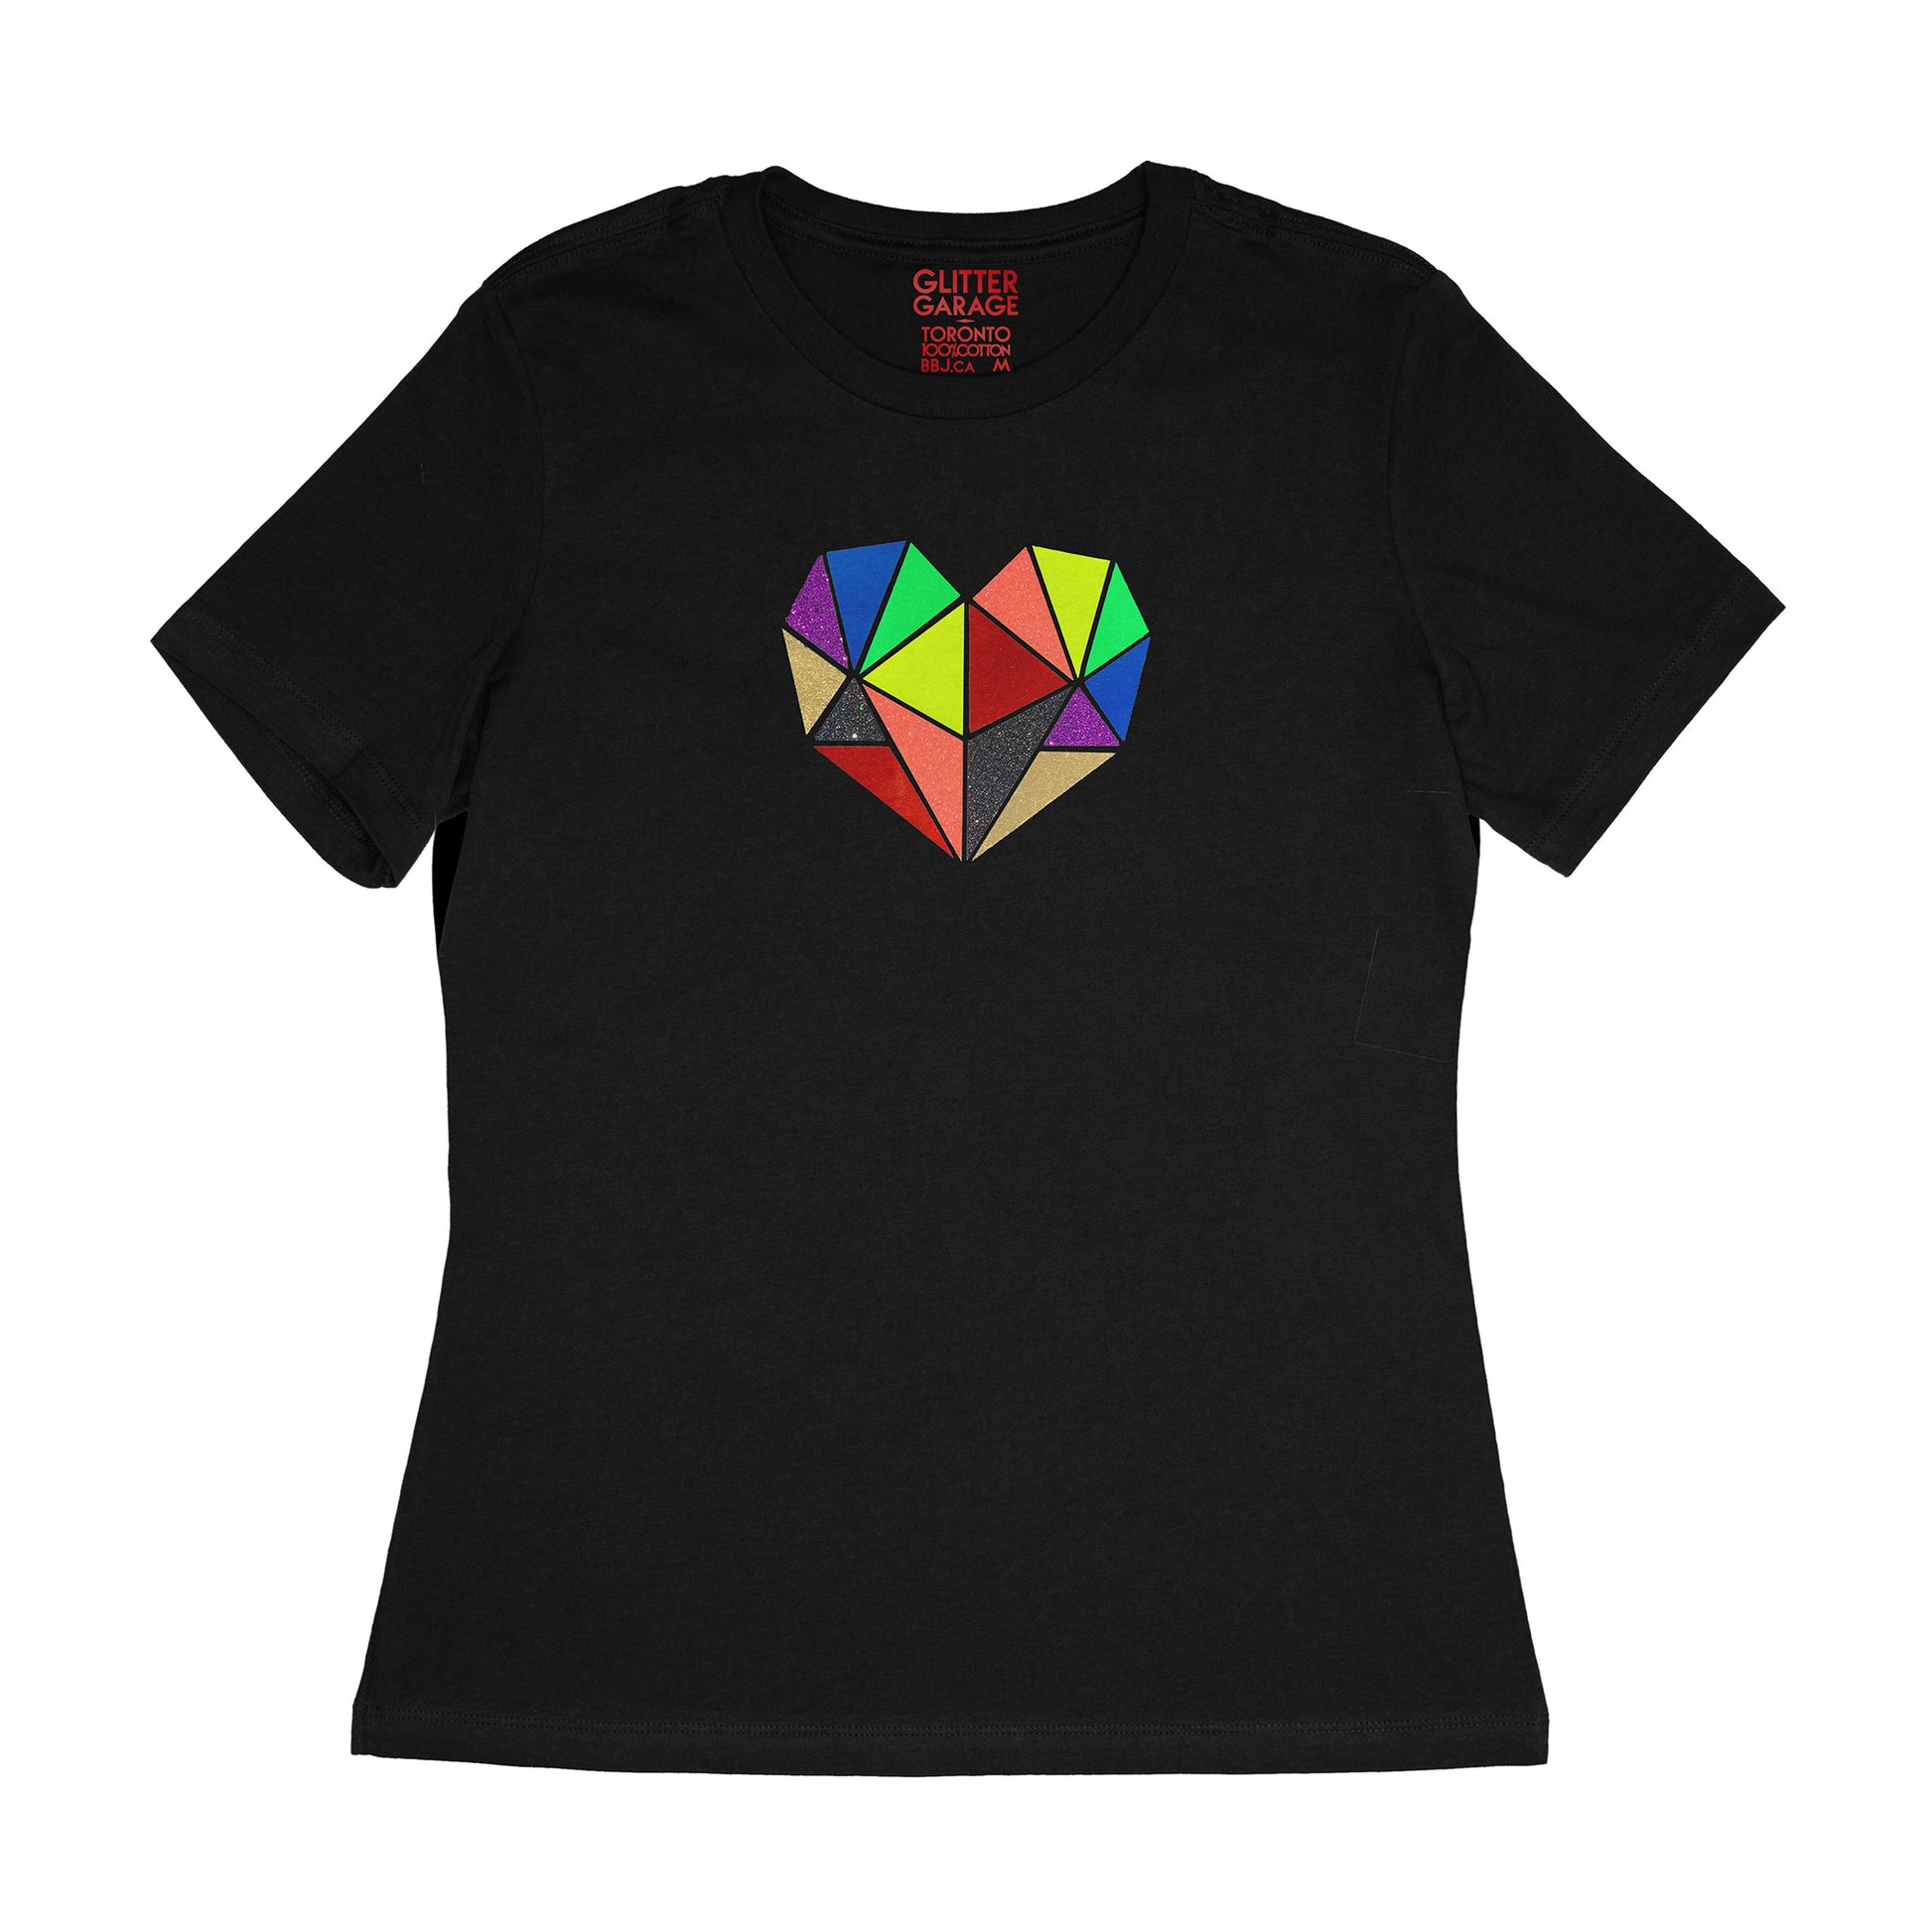 Vibrant rainbow faceted heart design with hand-applied neon, metallic and glitter vinyl on black womens relaxed fit t-shirt - by BBJ / Glitter Garage